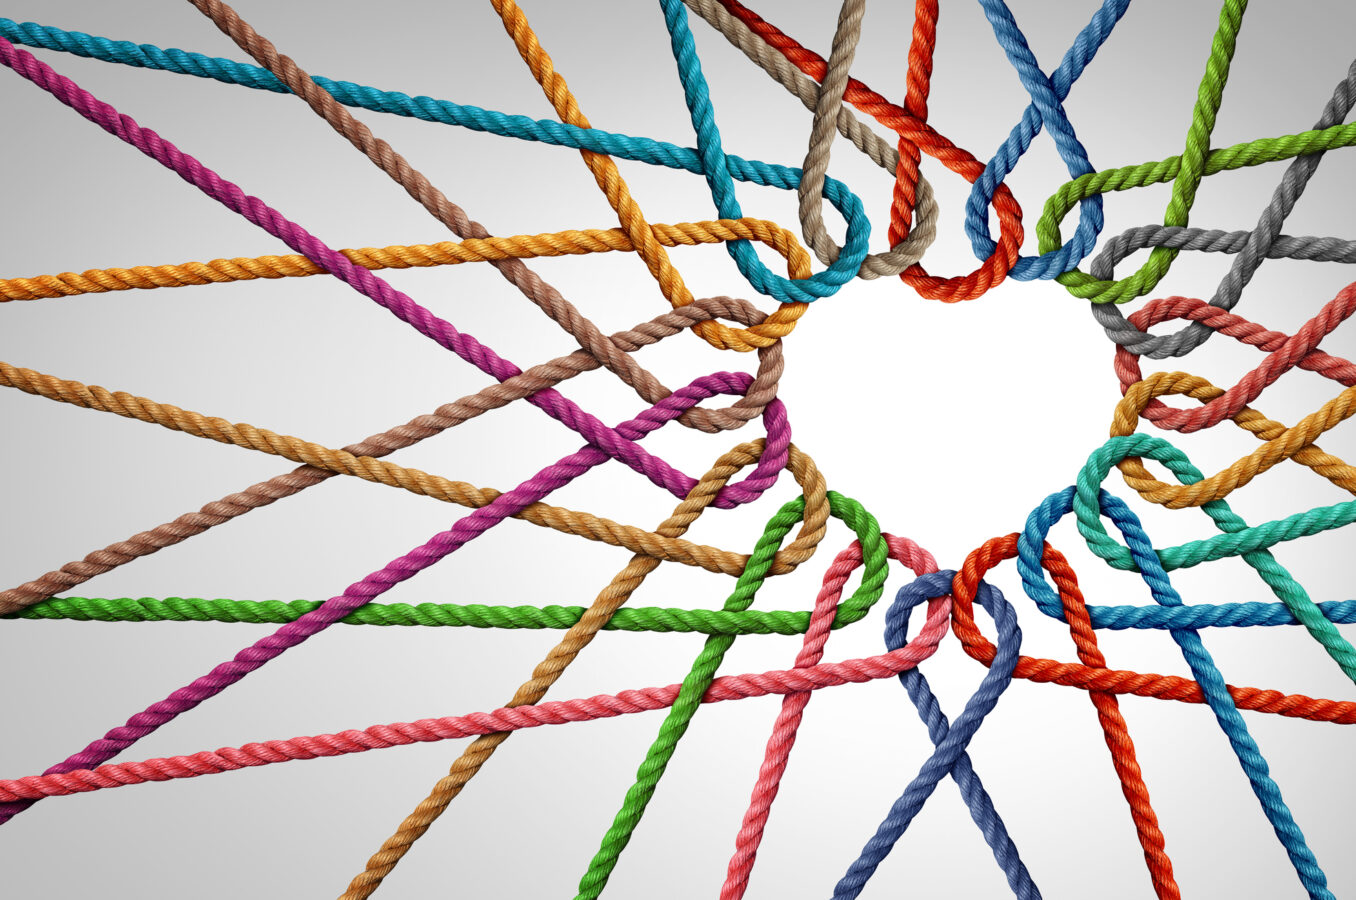 Colored threads woven into a heart shape.